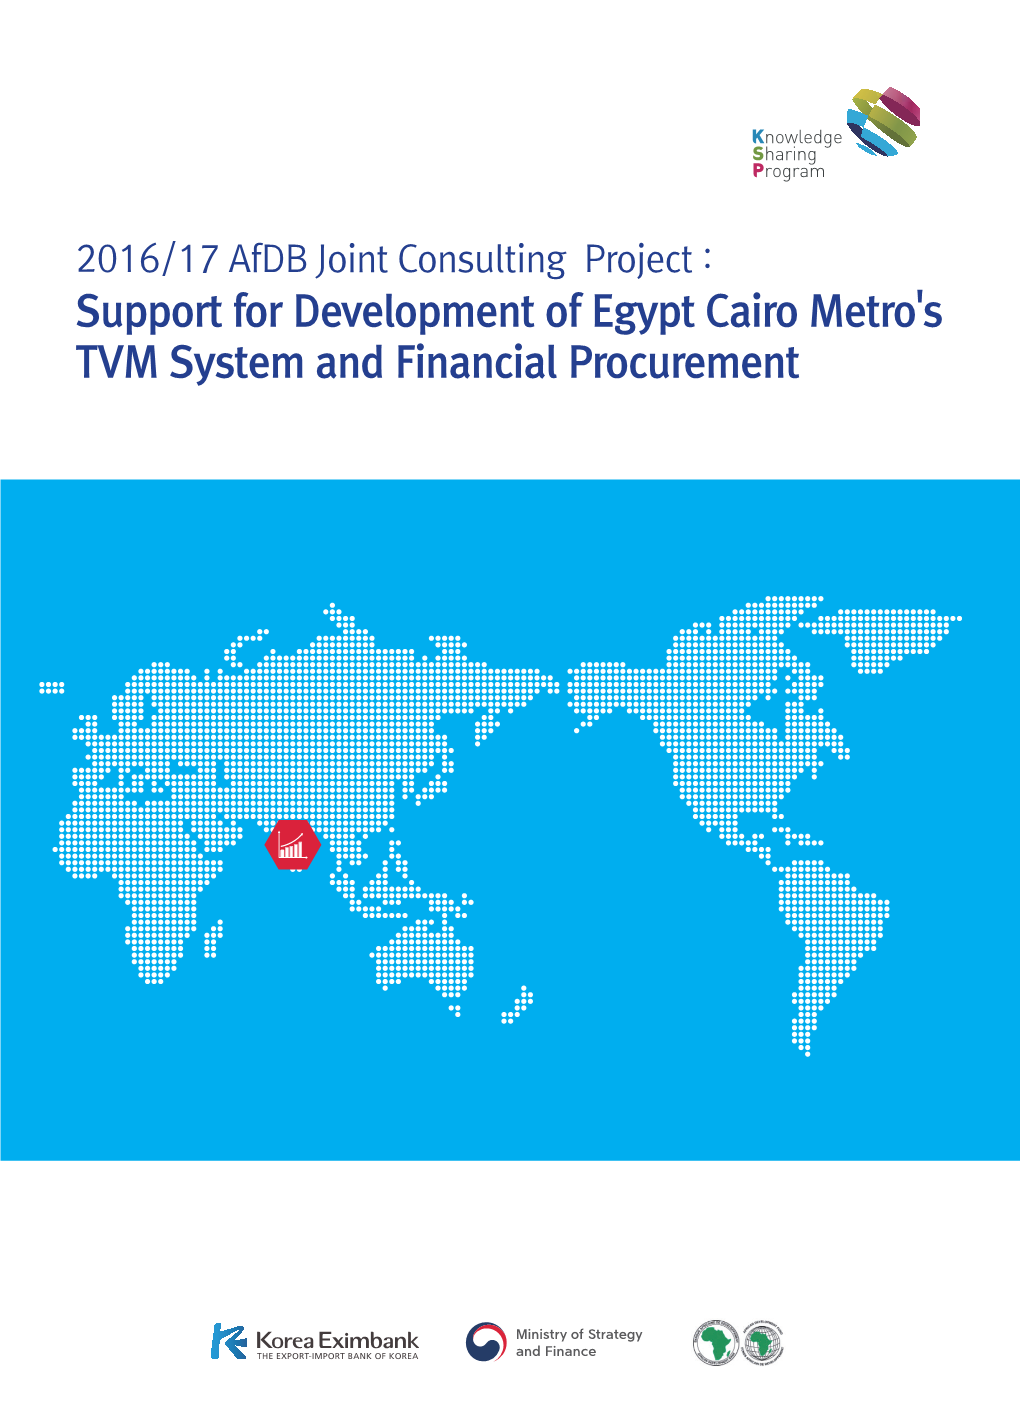 Support for Development of Egypt Cairo Metro's TVM System and Financial Procurement